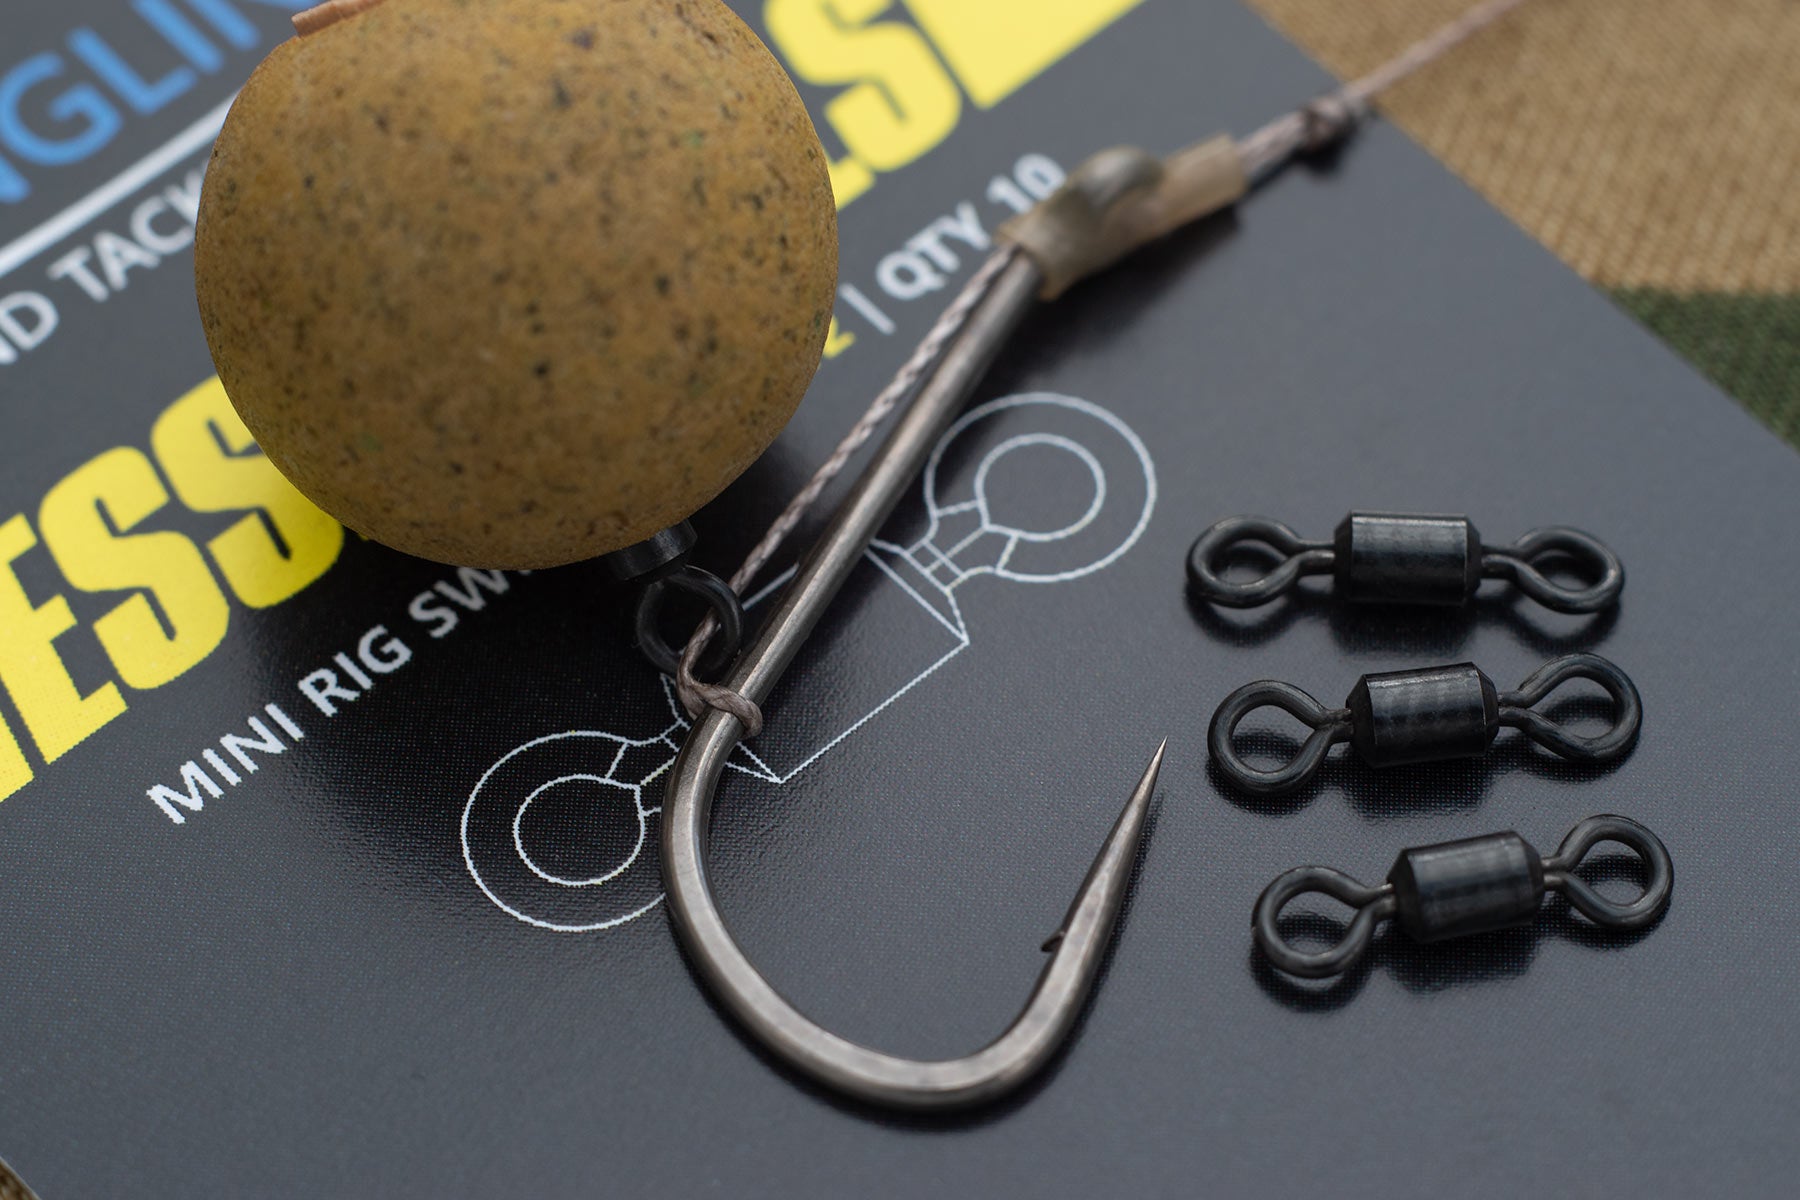 Razor sharp points from Angling Iron! Duropoint Longshank carp hooks are best for the slip d, Blowback and Multi rigs as pictured. Use with our essentials terminal tackle.